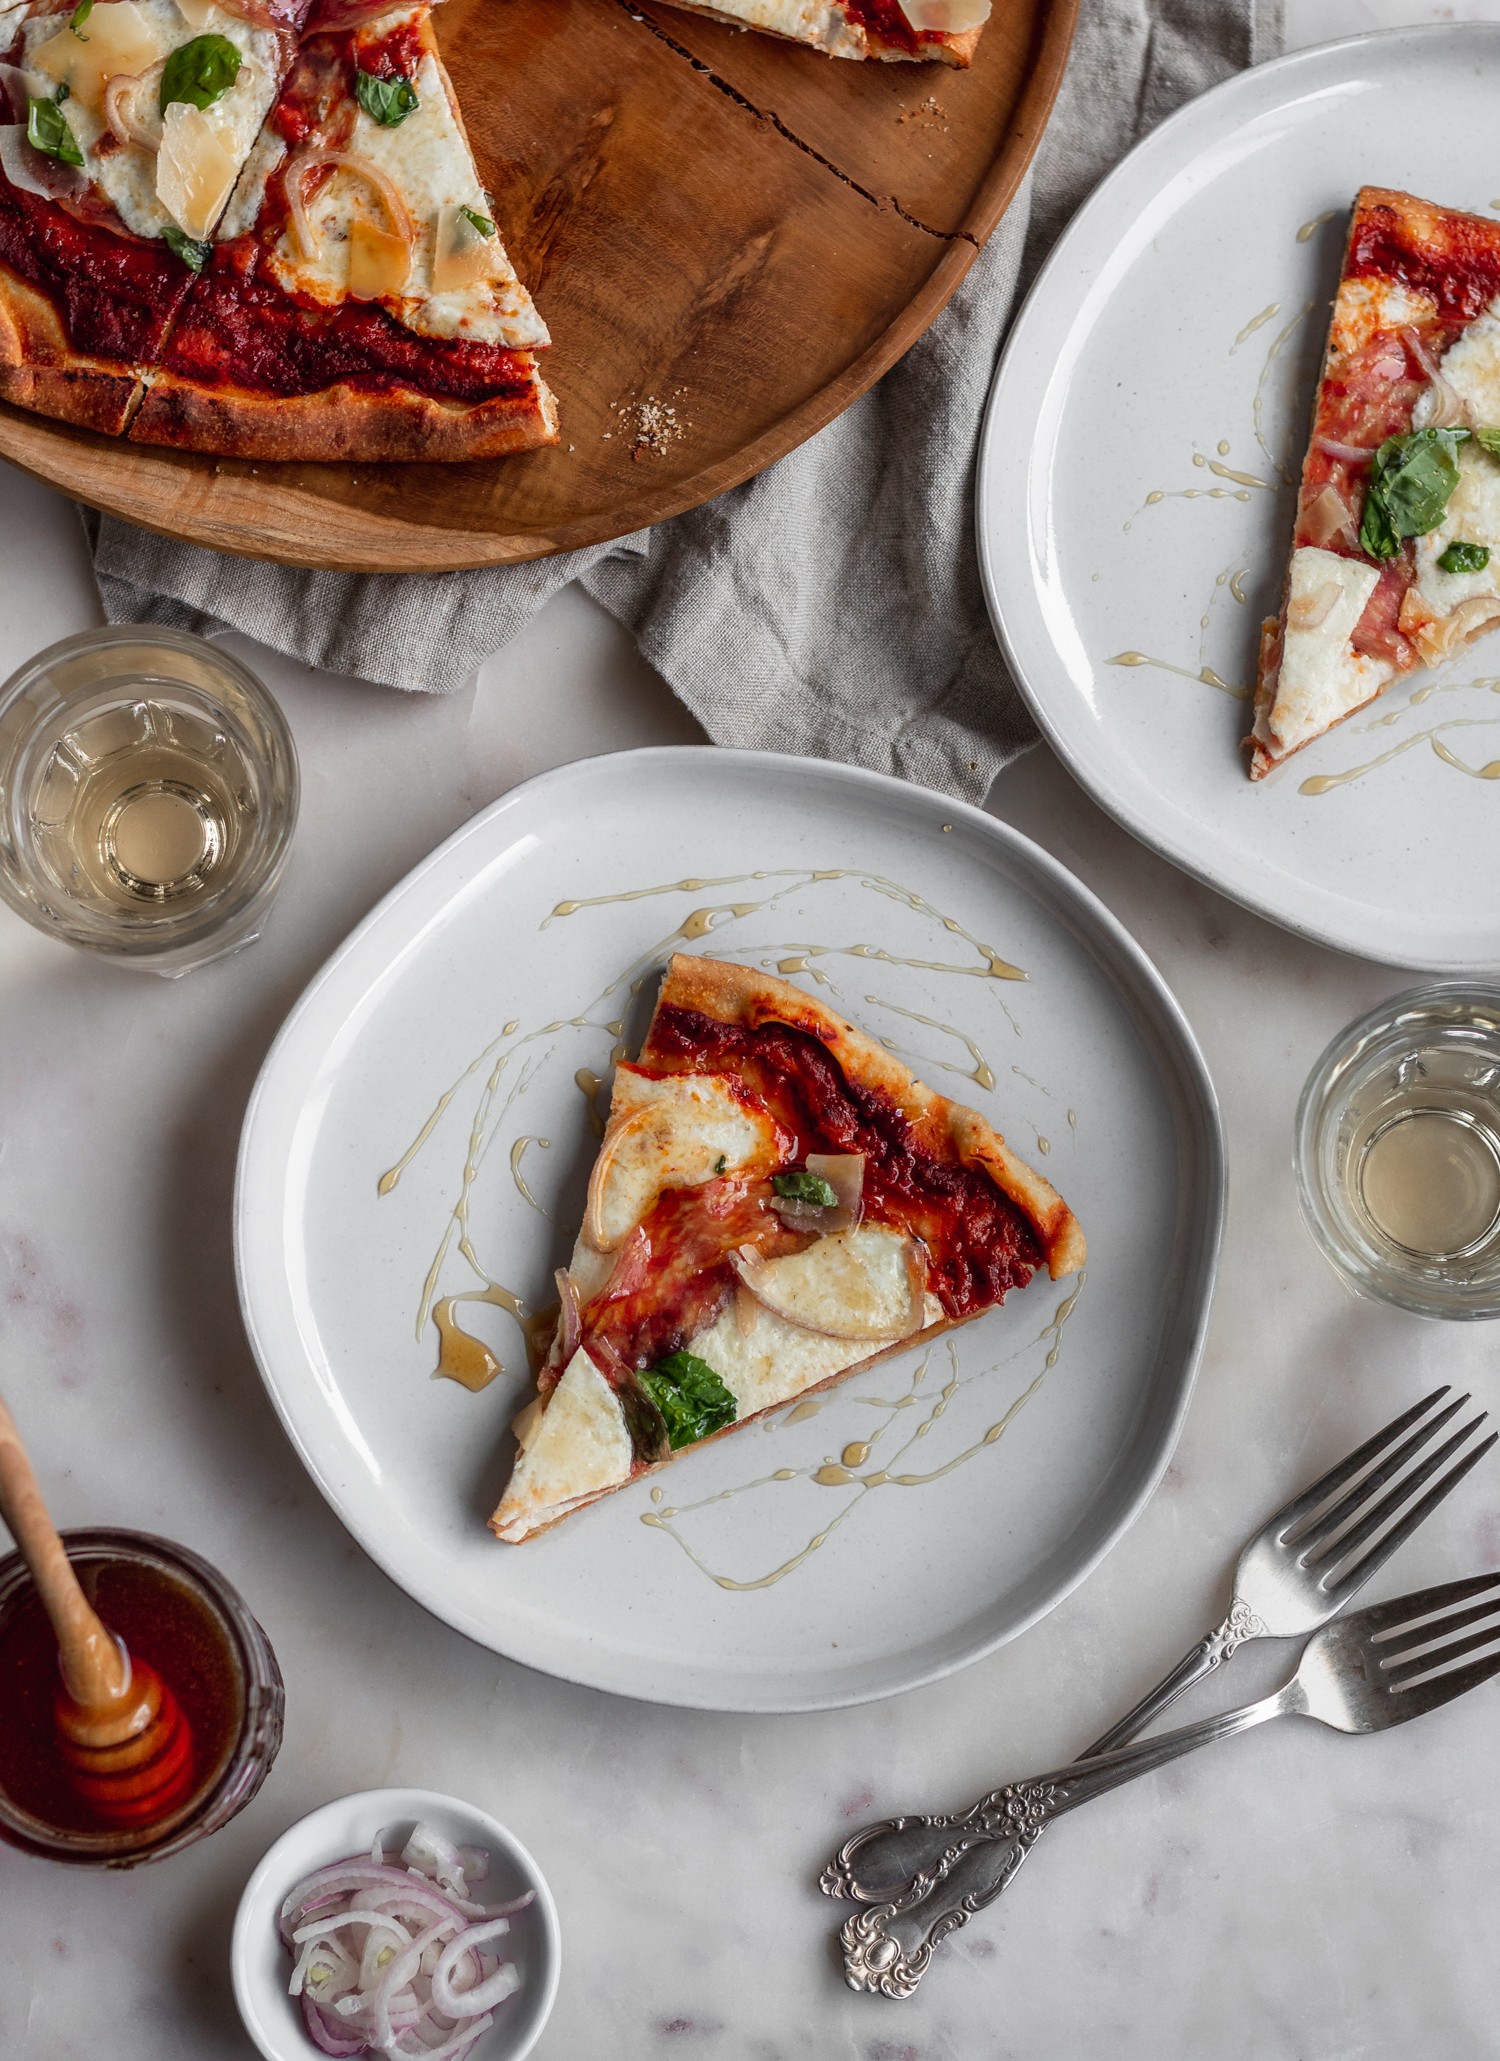 A slice of pizza with soppressata on a white plate next to another plate of pizza, wine glasses, and forks with a marble background.